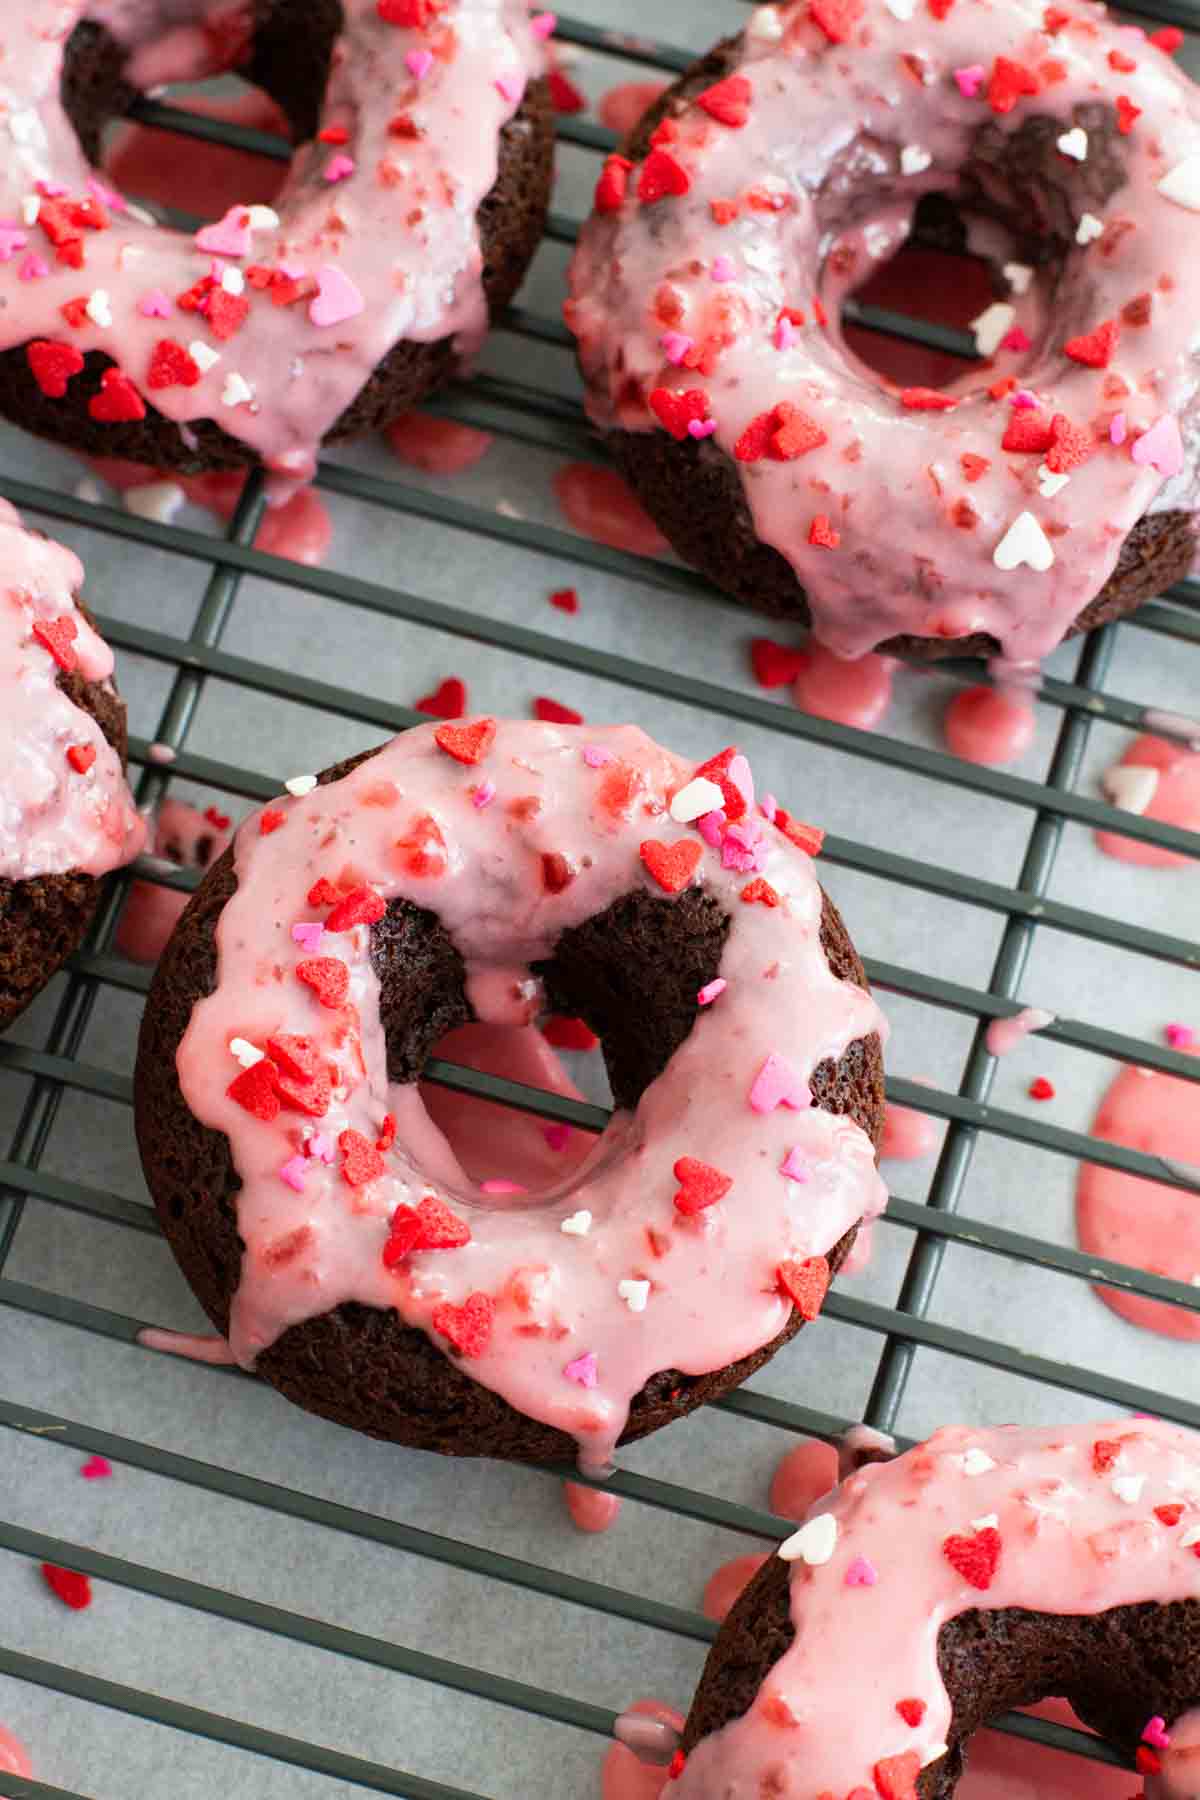 Baked Chocolate Donuts with Cherry Glaze for Valentine's Day